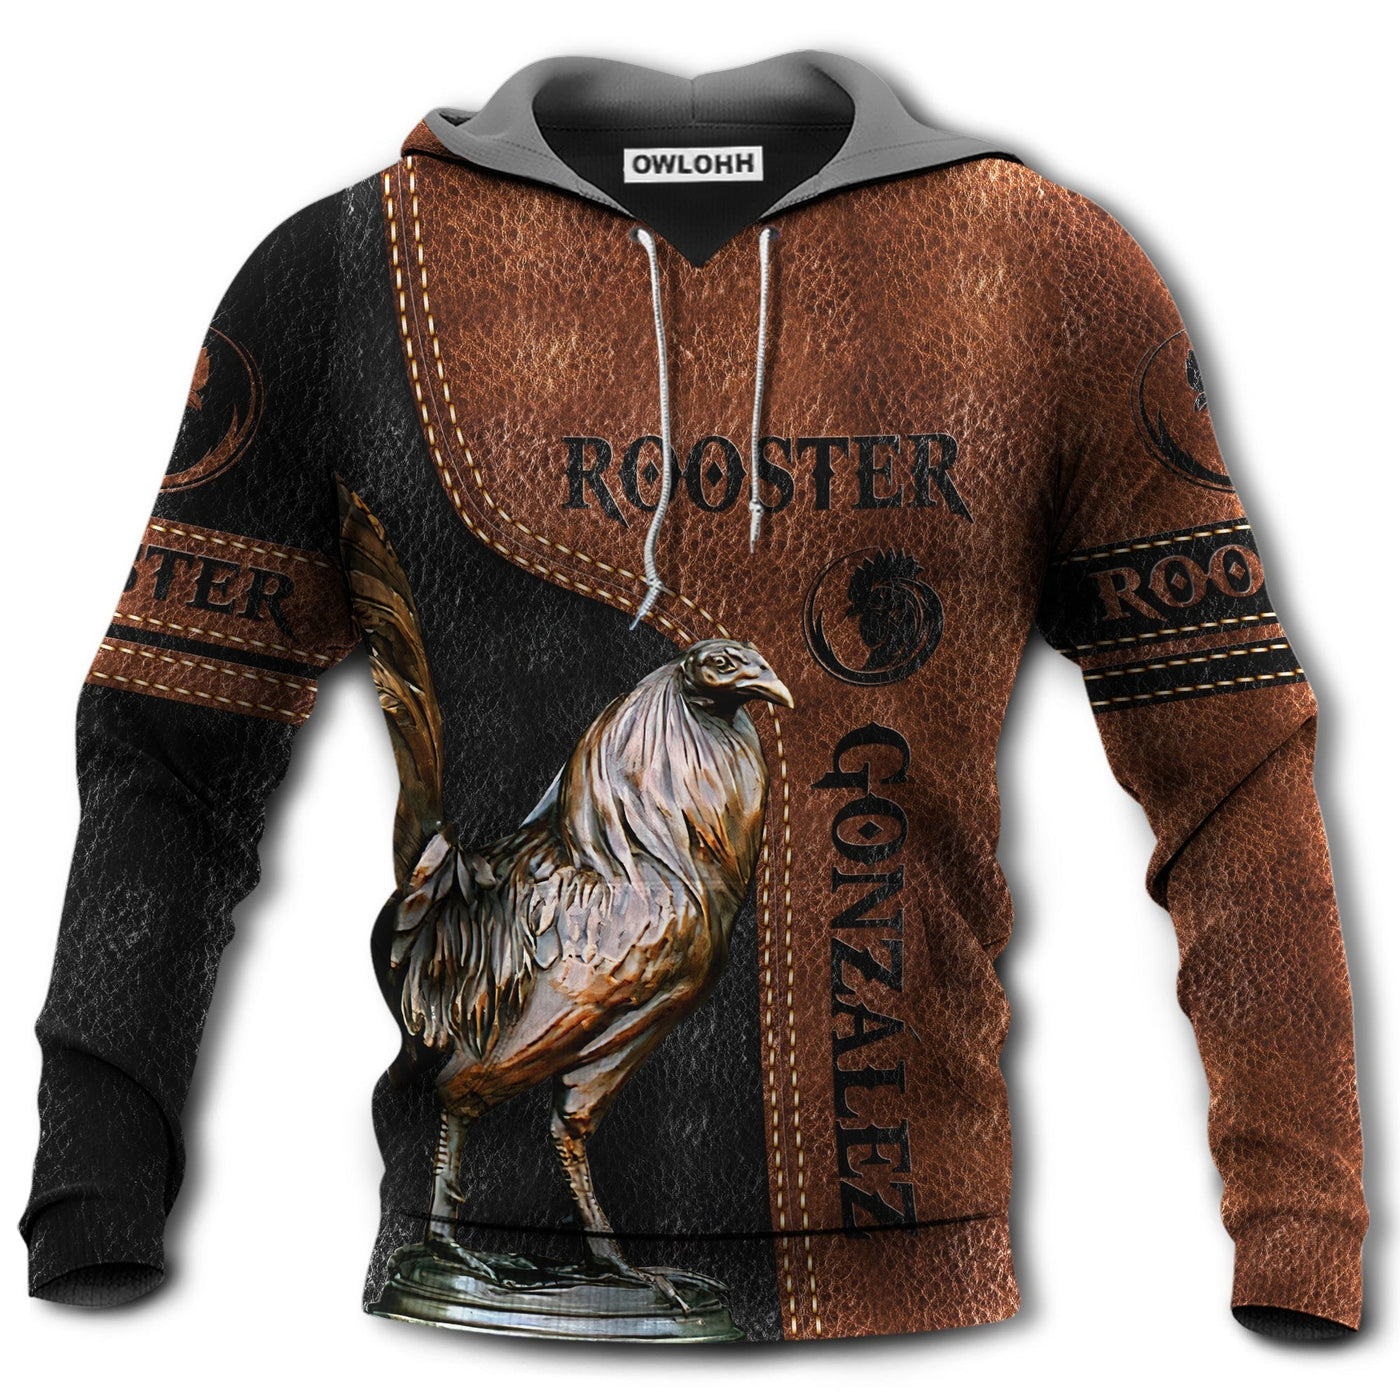 Unisex Hoodie / S Chicken Rooster Amazing Leather Style Personalized - Hoodie - Owls Matrix LTD